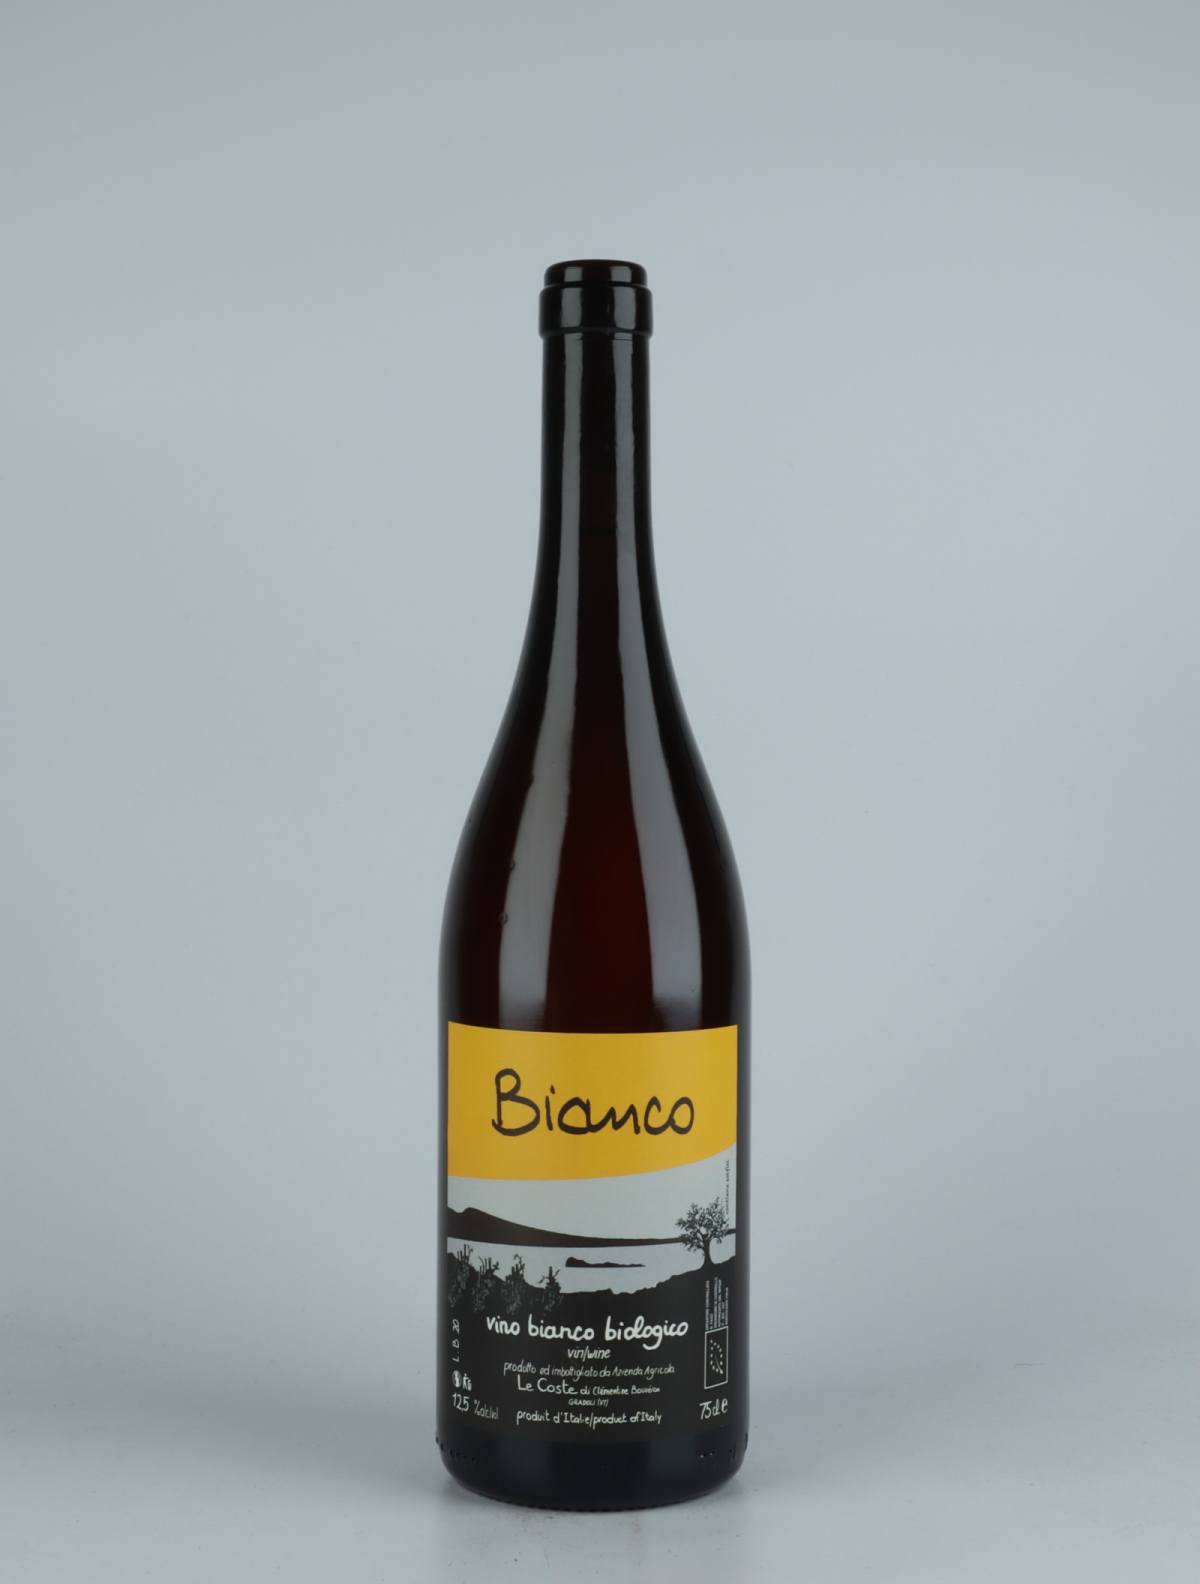 A bottle 2020 Bianco White wine from Le Coste, Lazio in Italy